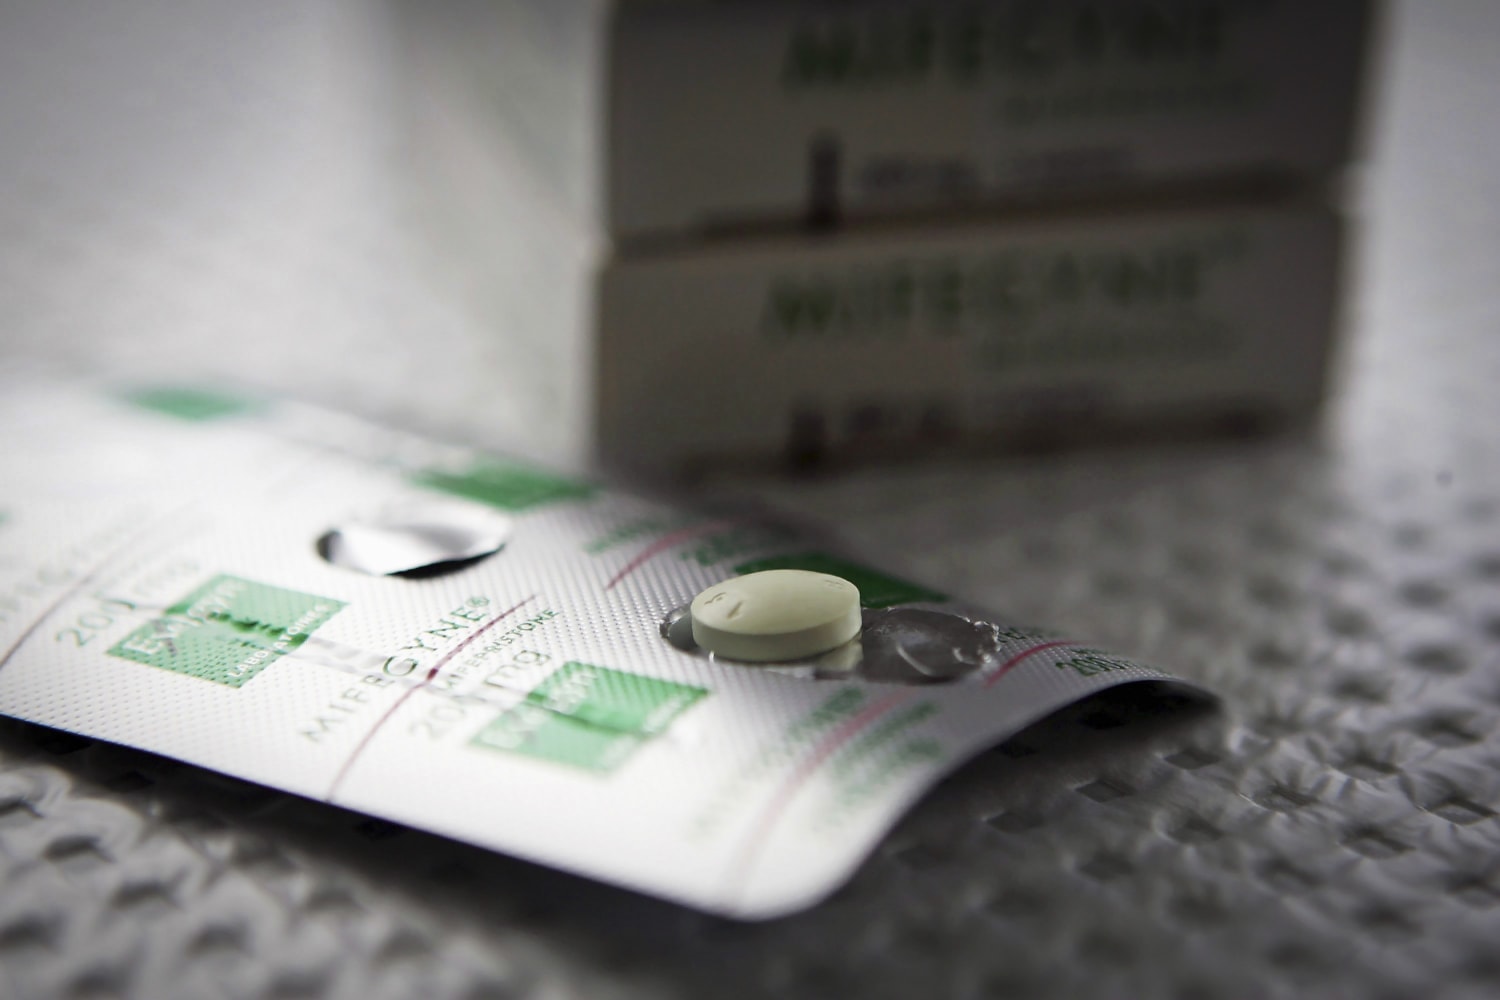 Texas man sues ex-wife's friends, alleging they helped her get abortion pills in violation of state law